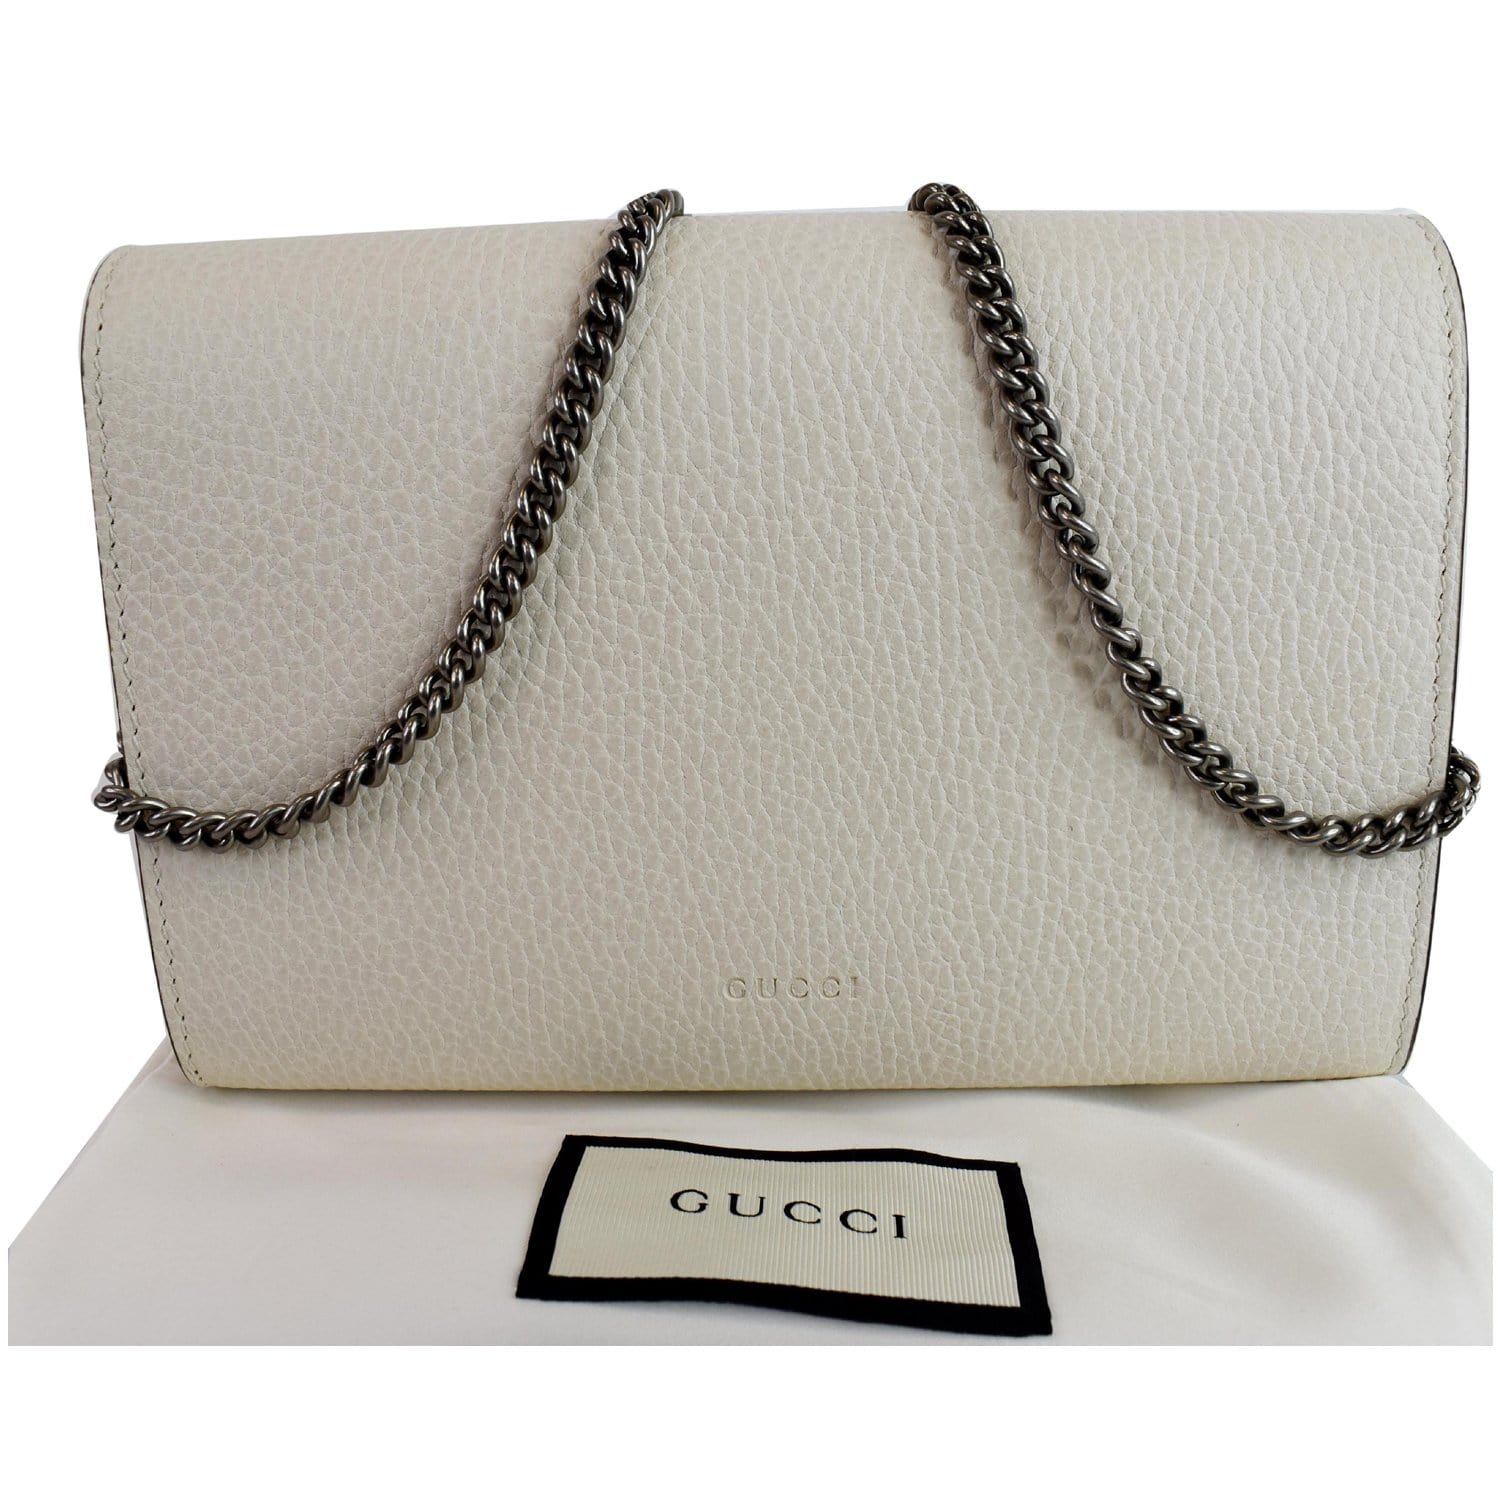 Gucci, Bags, Authentic Gucci Dionysus White Leather Chain